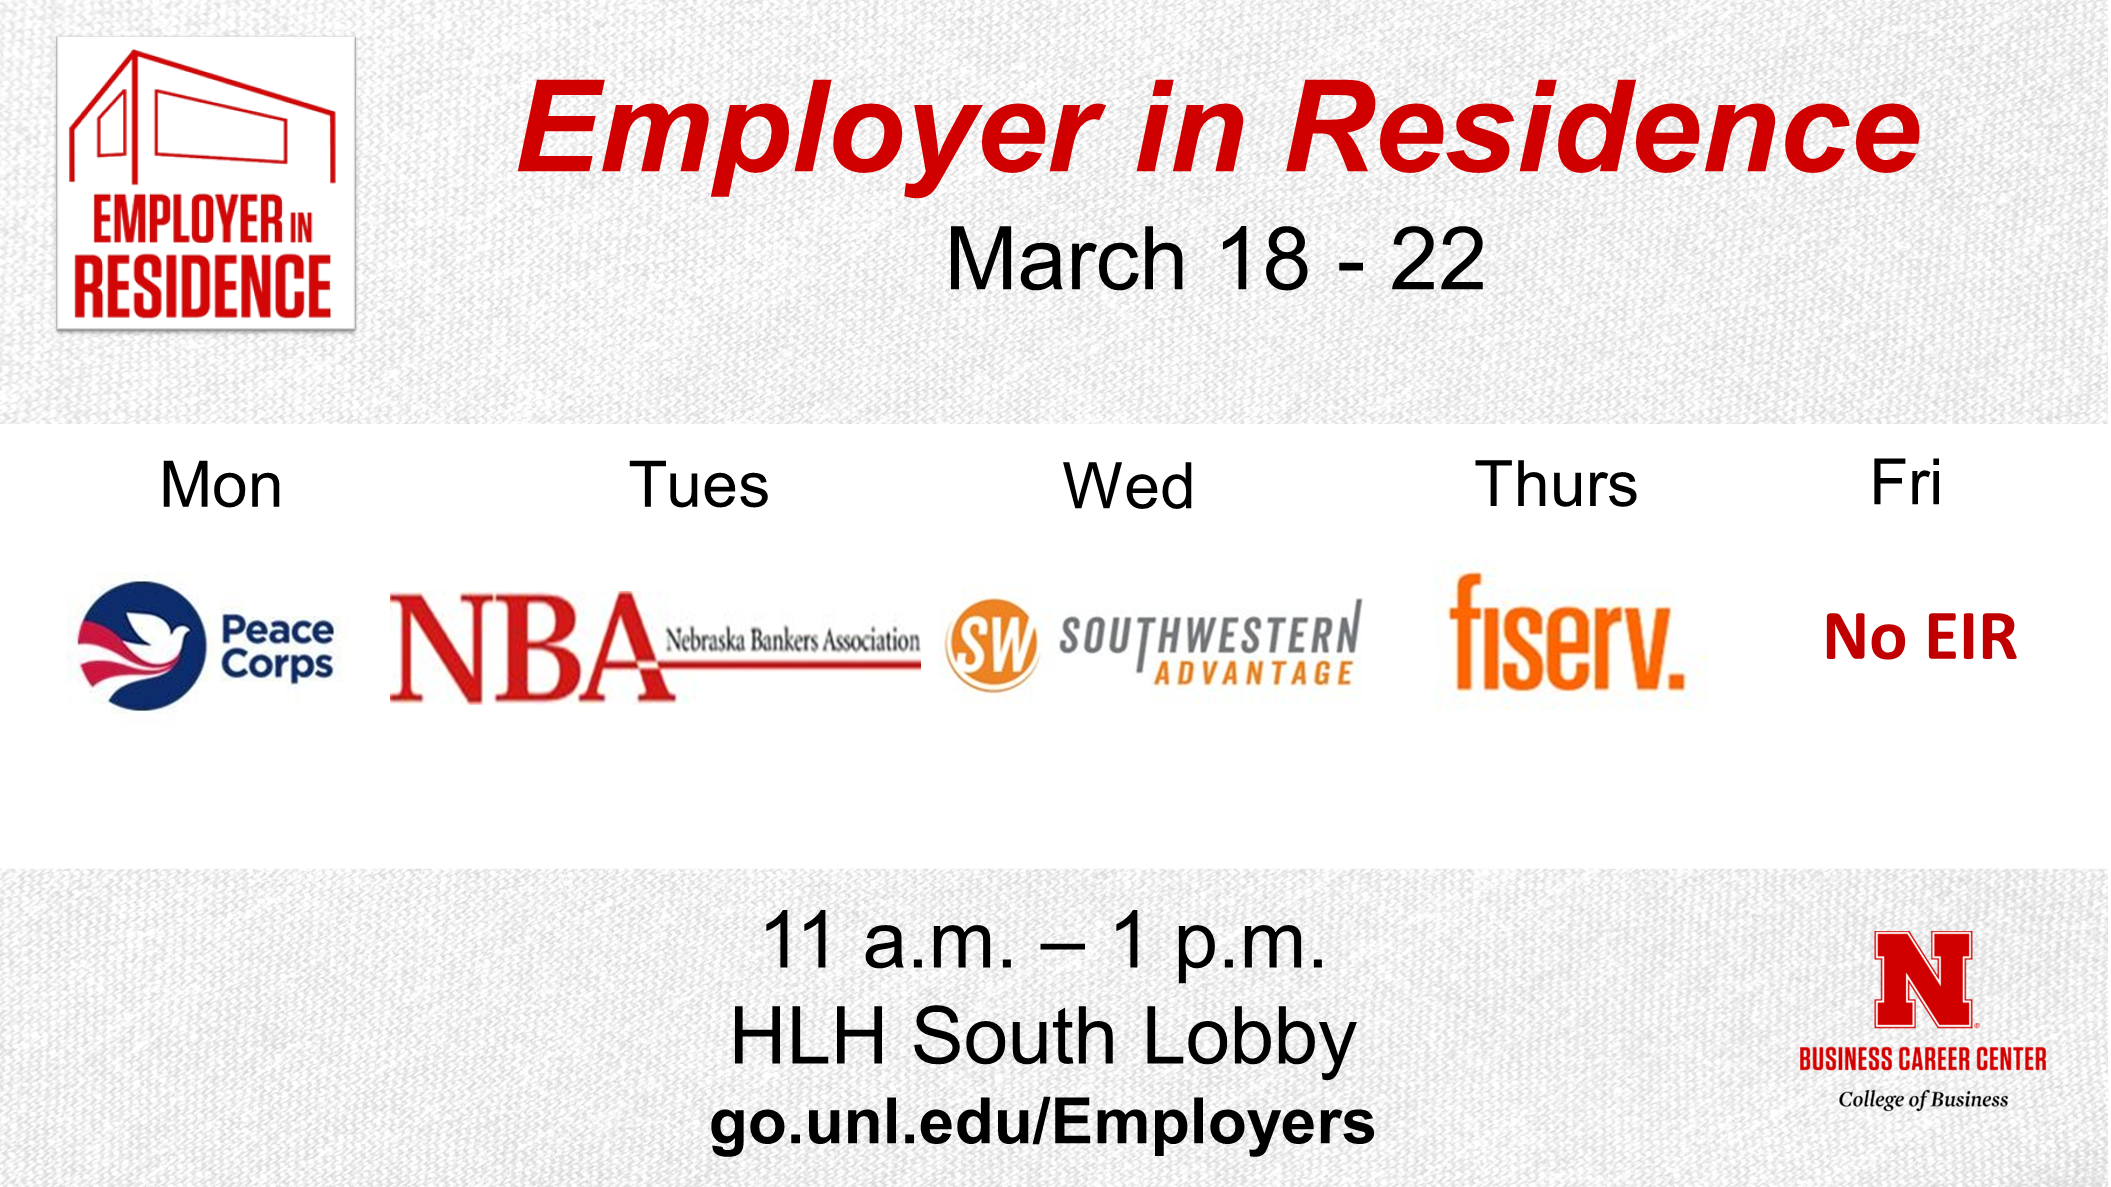 Employer in Residence | Schedule for March 18 - 22